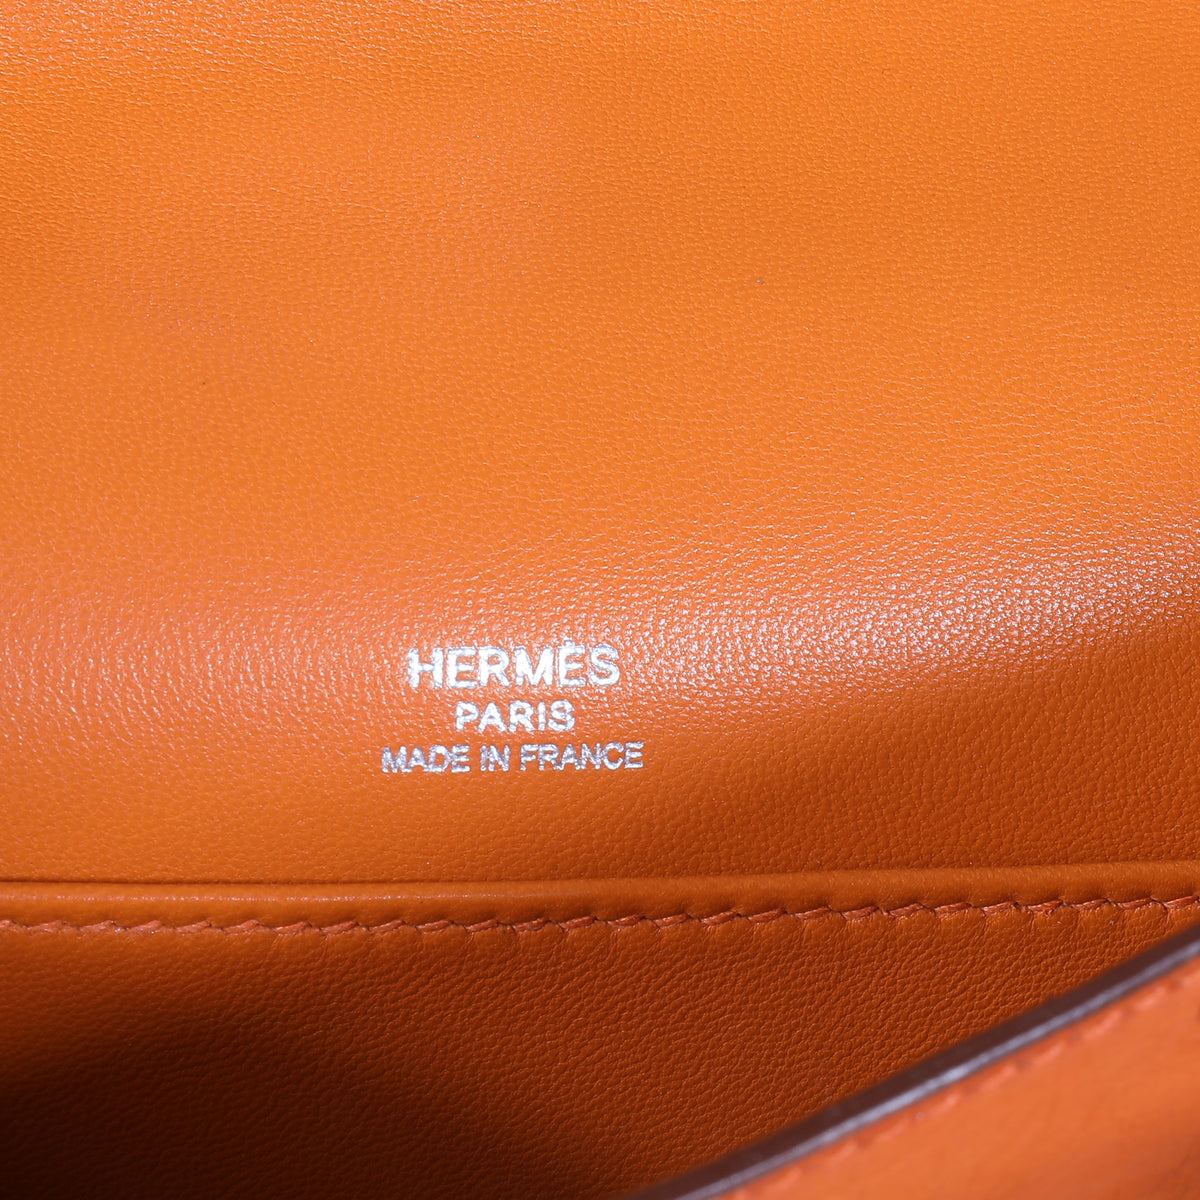 Hermes Tangerine Ostrich Kelly Pochette Bag with Gold Hardware. A